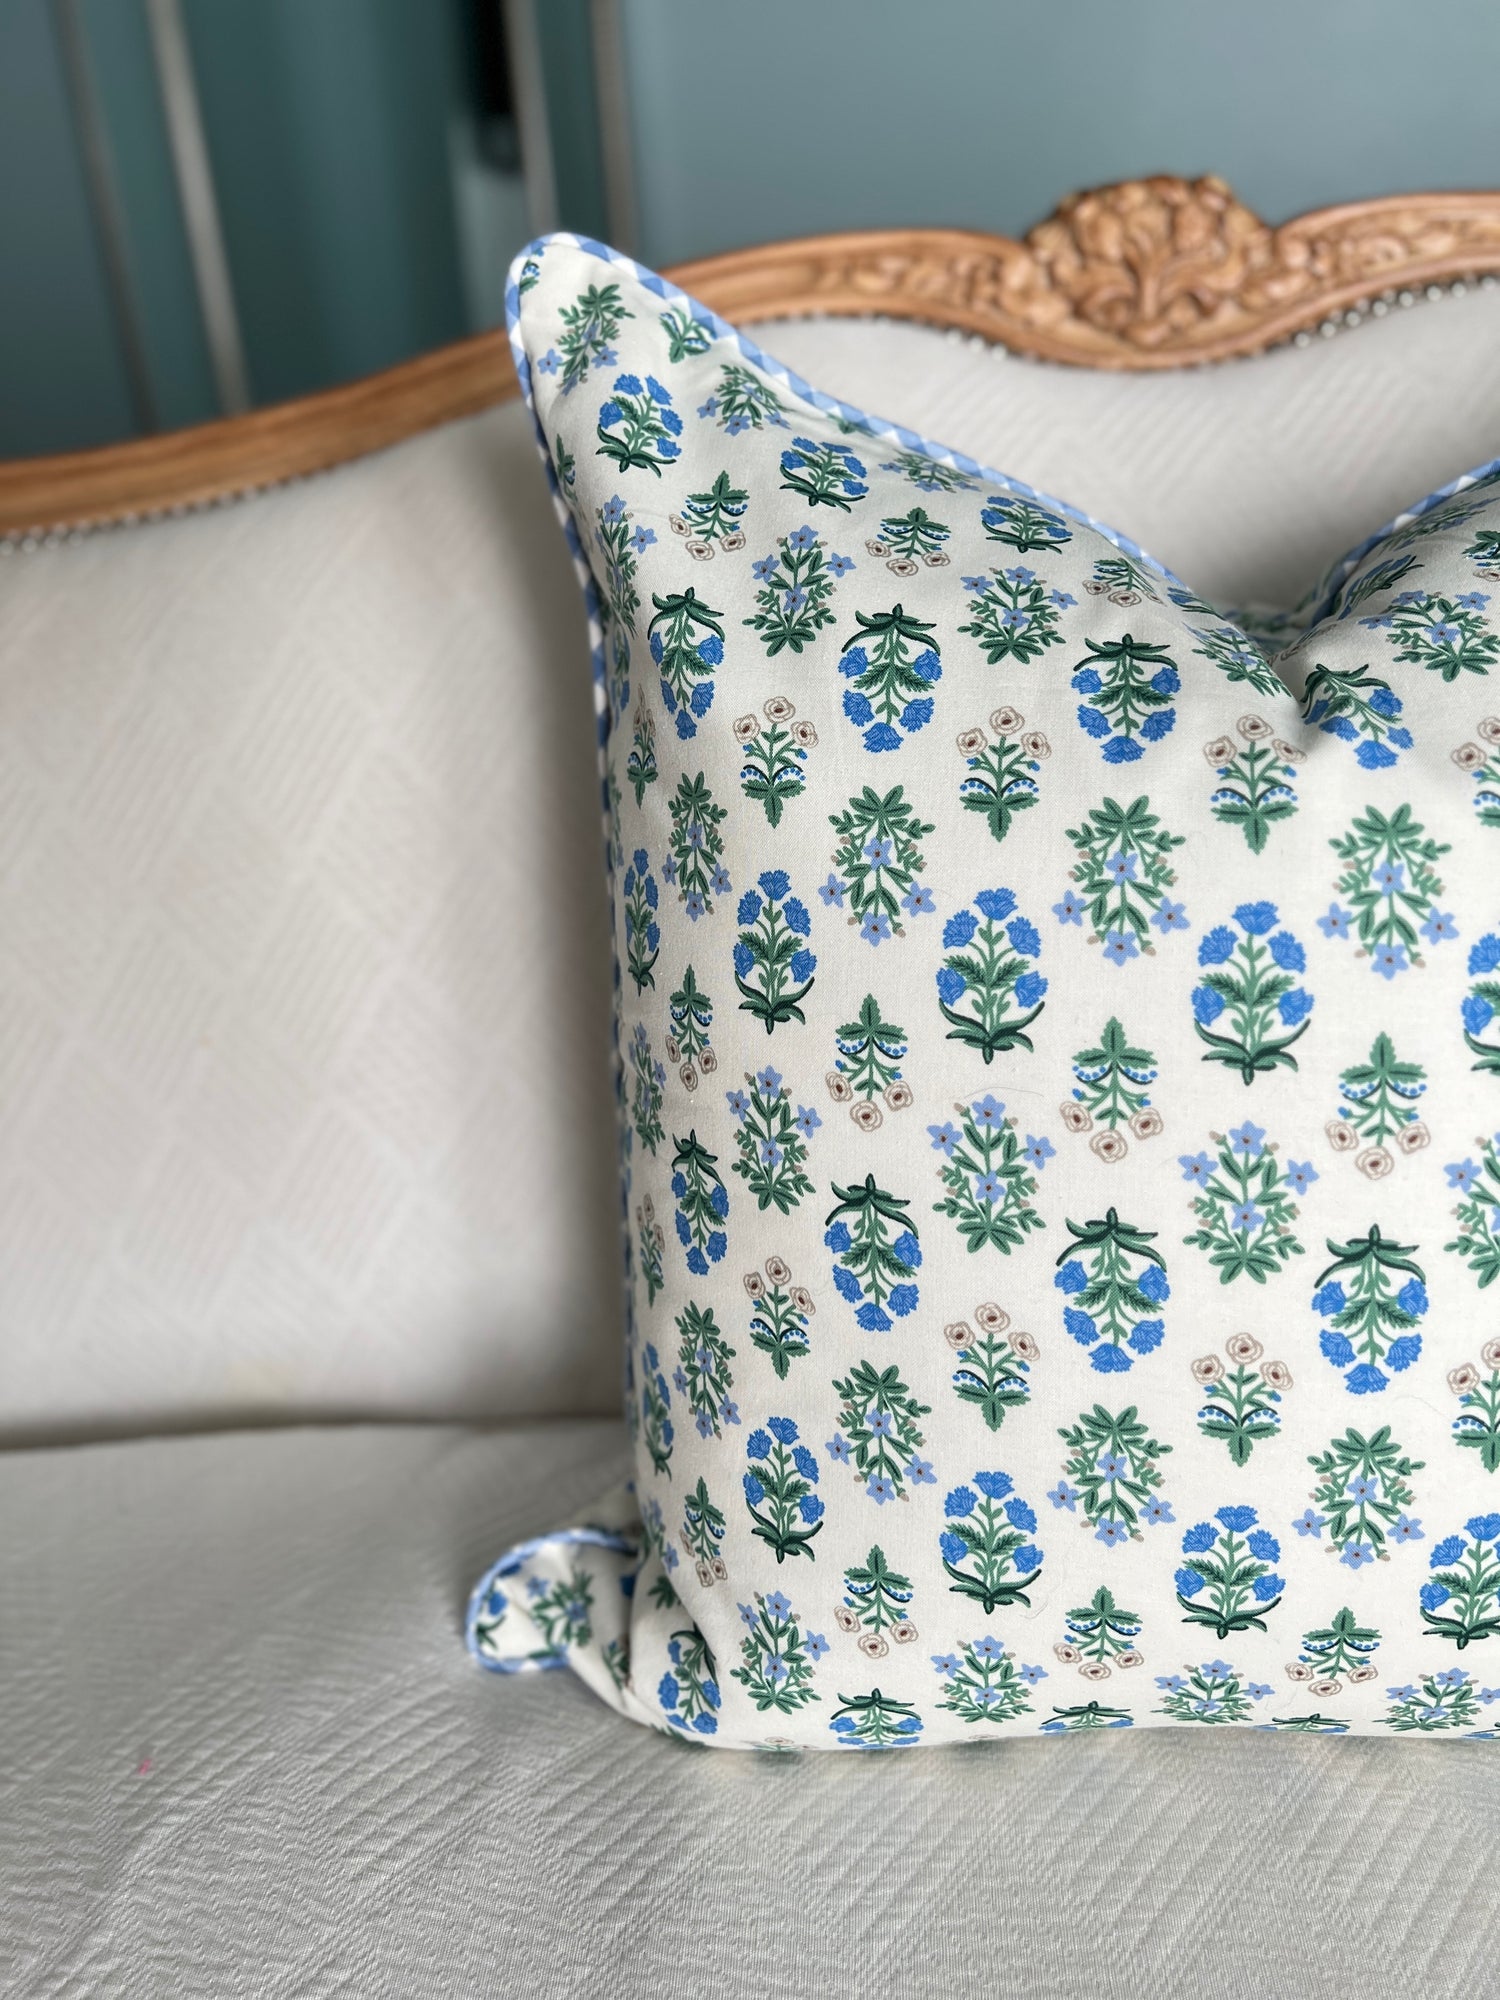 Blue, white, and green block print floral pillow cover with gingham cord